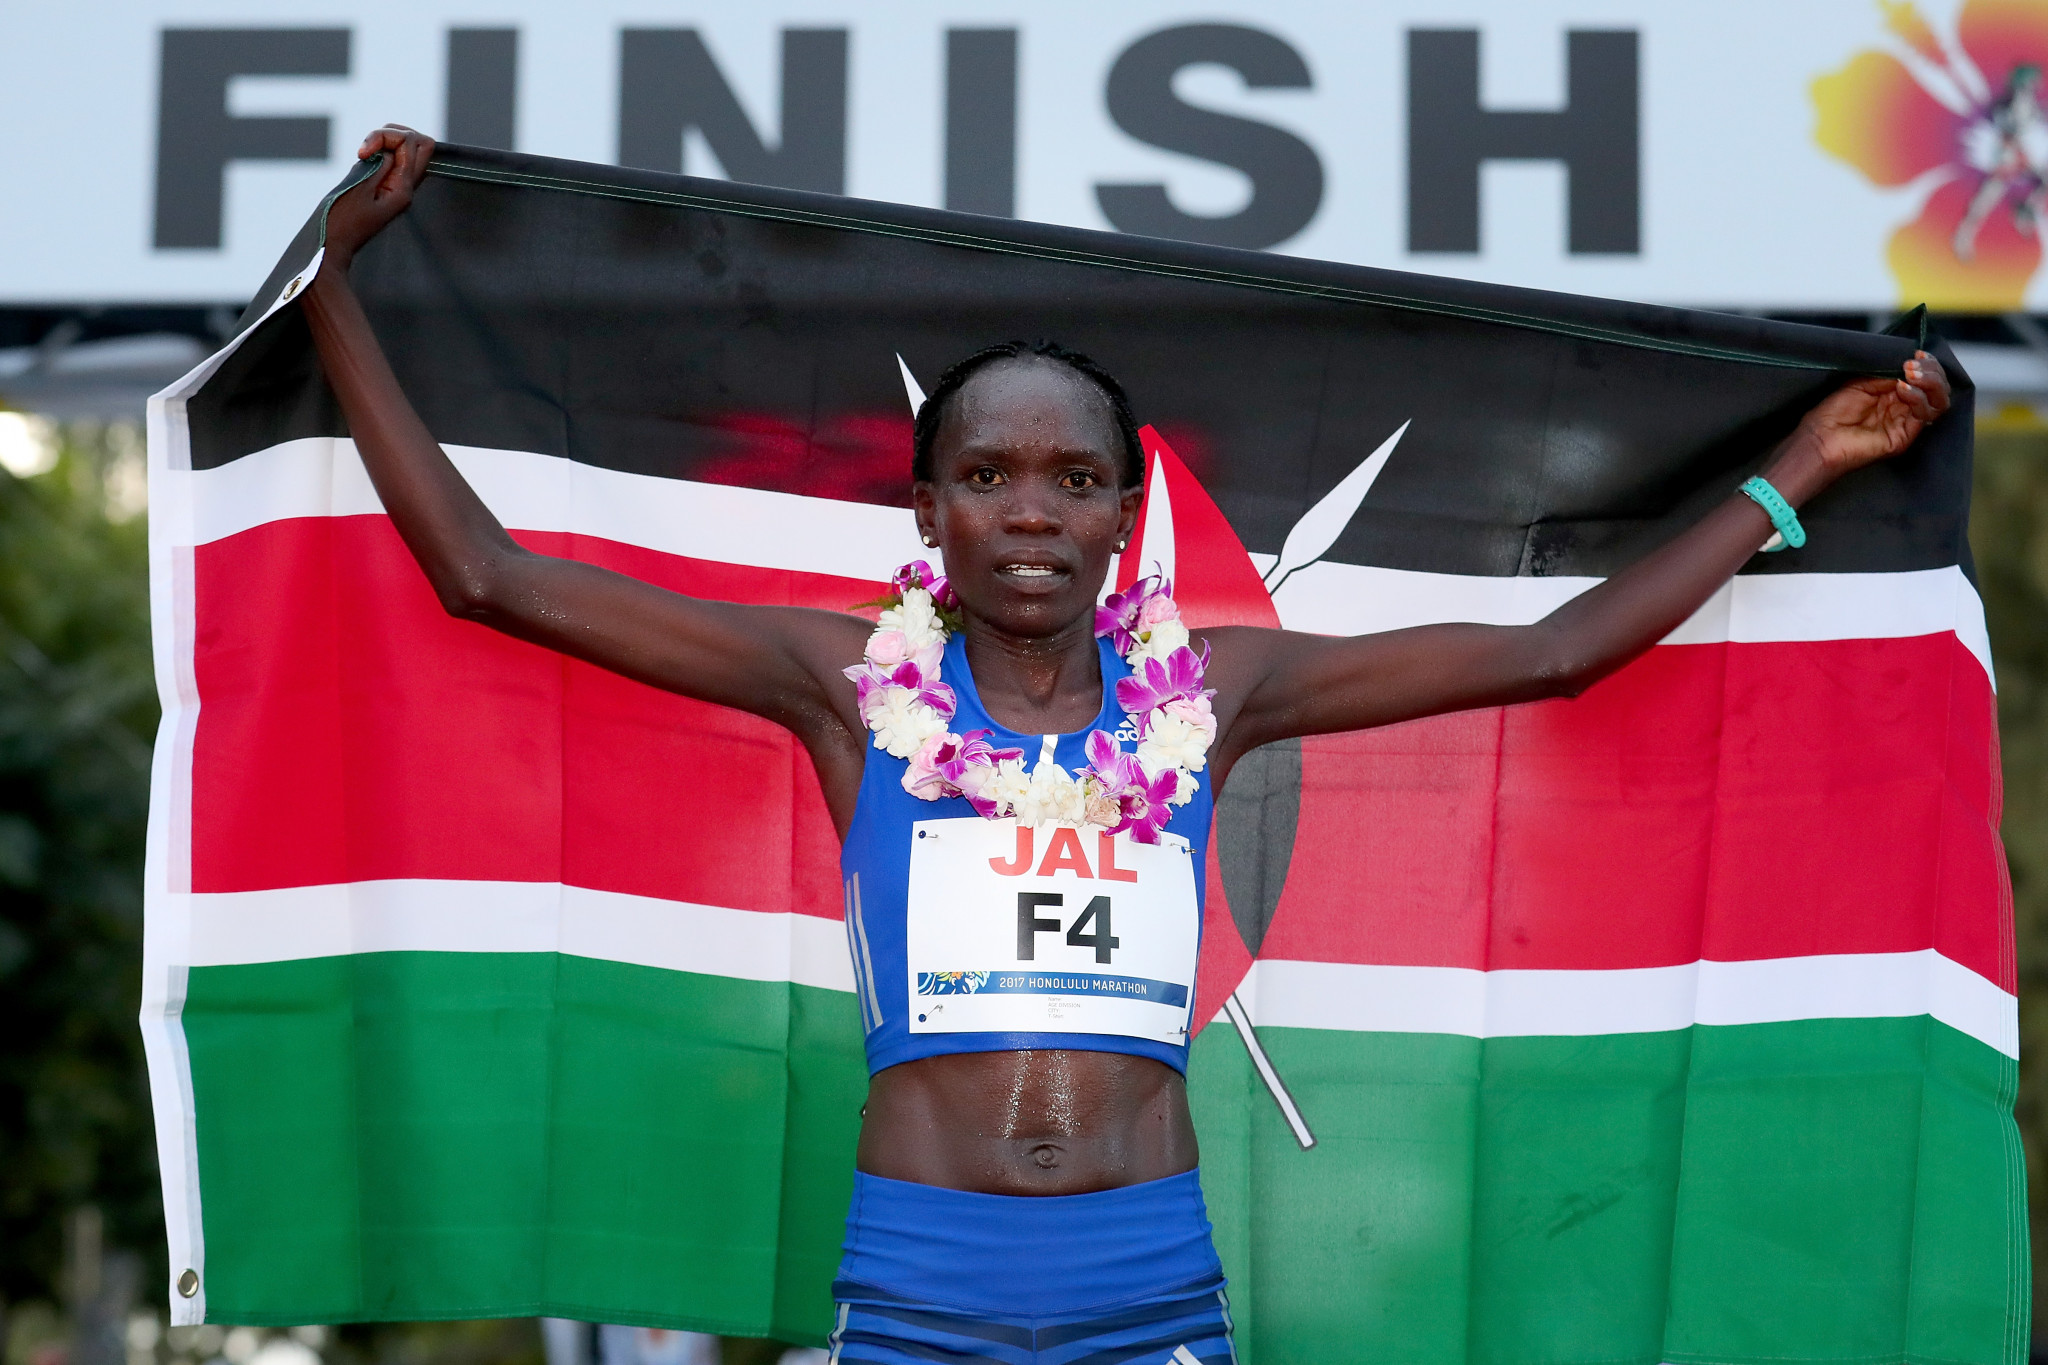 Joyce Chepkirui will be banned until 2023 due to an anti-doping violation ©Getty Images